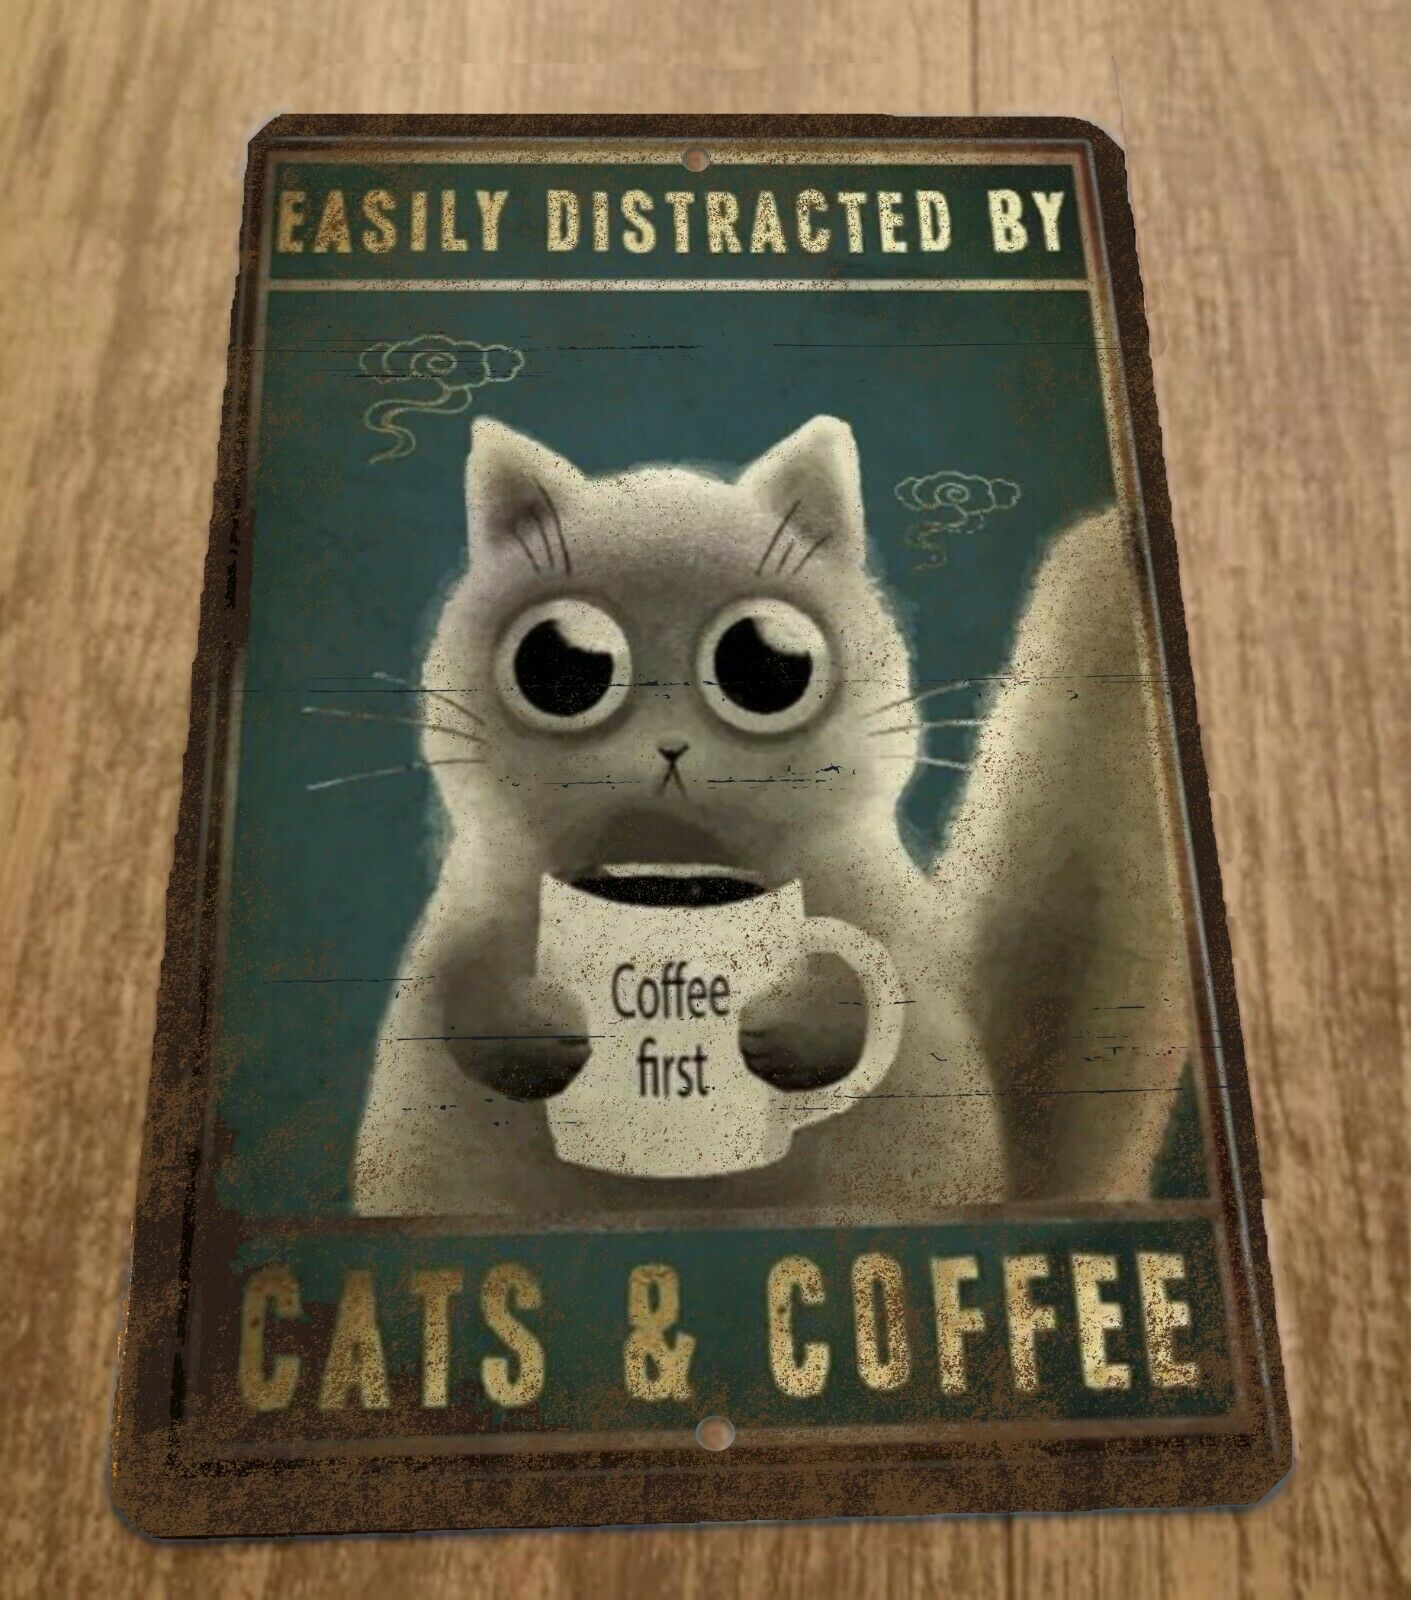 Easily Distracted by Cats and Coffee 8x12 Metal Wall Sign Misc Poster Animals